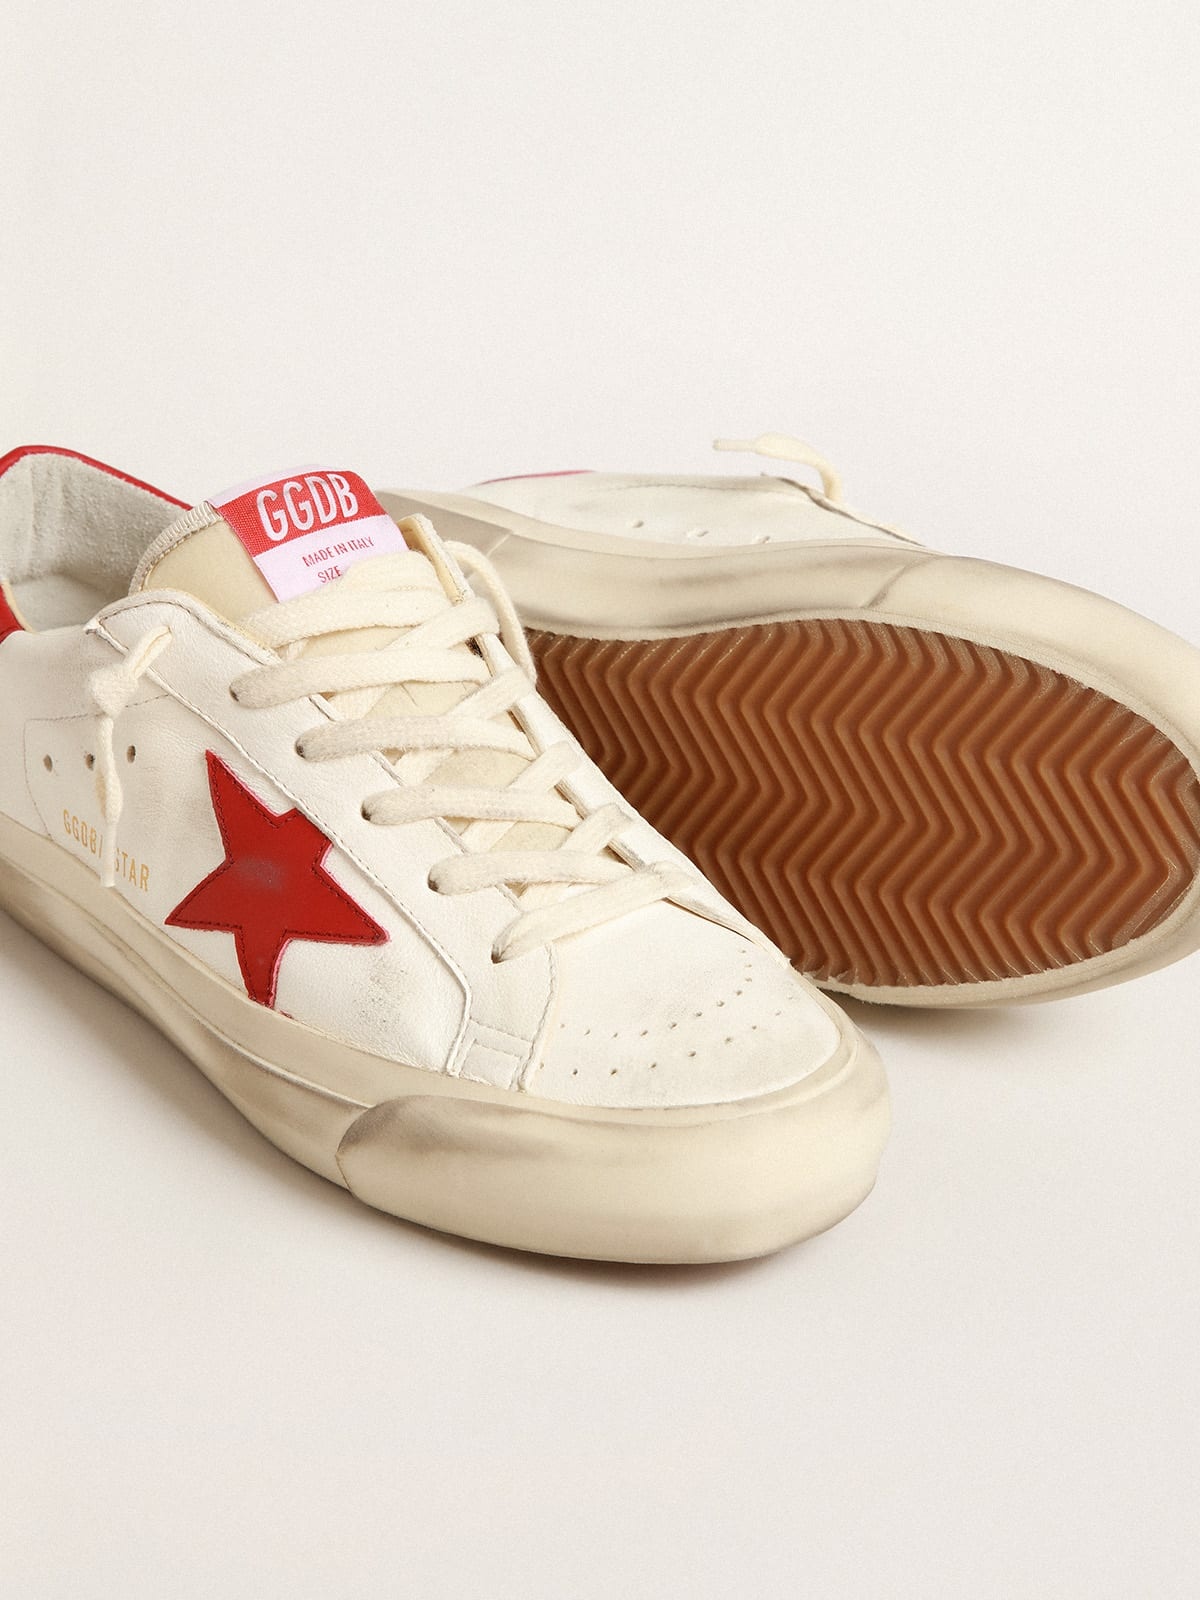 Men’s Super-Star LTD in nappa leather with red star and heel tab - 3